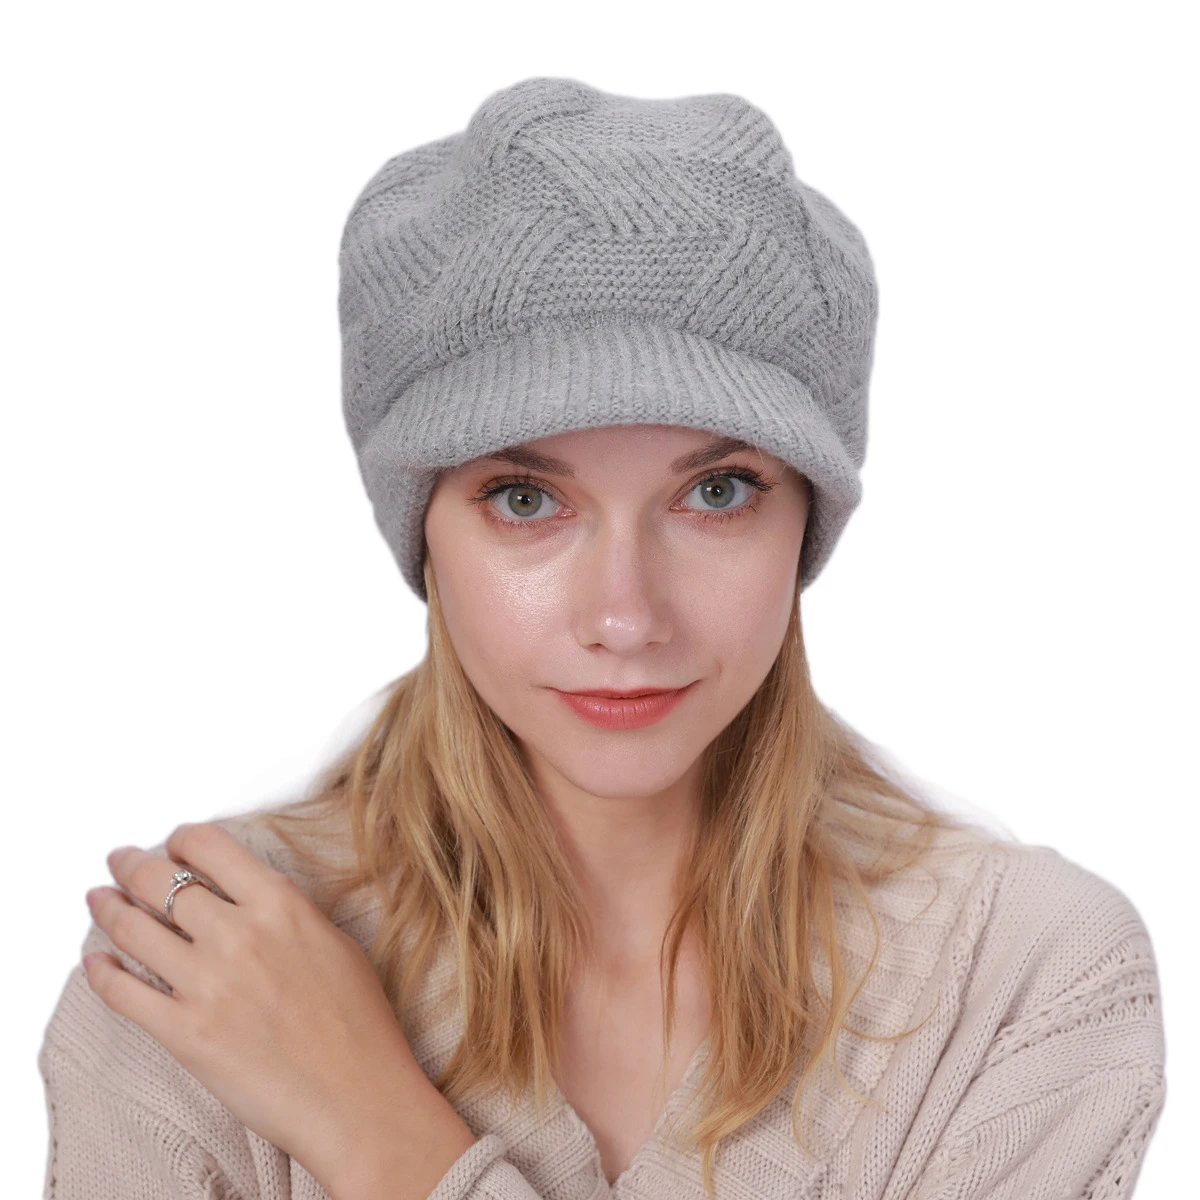 

Women Winter Warm Fleece Lined Slouchy Skull Beanie Visor Cap Knitted Newsboy Hats Ladies Cold Weather Snow Hat Brimmed